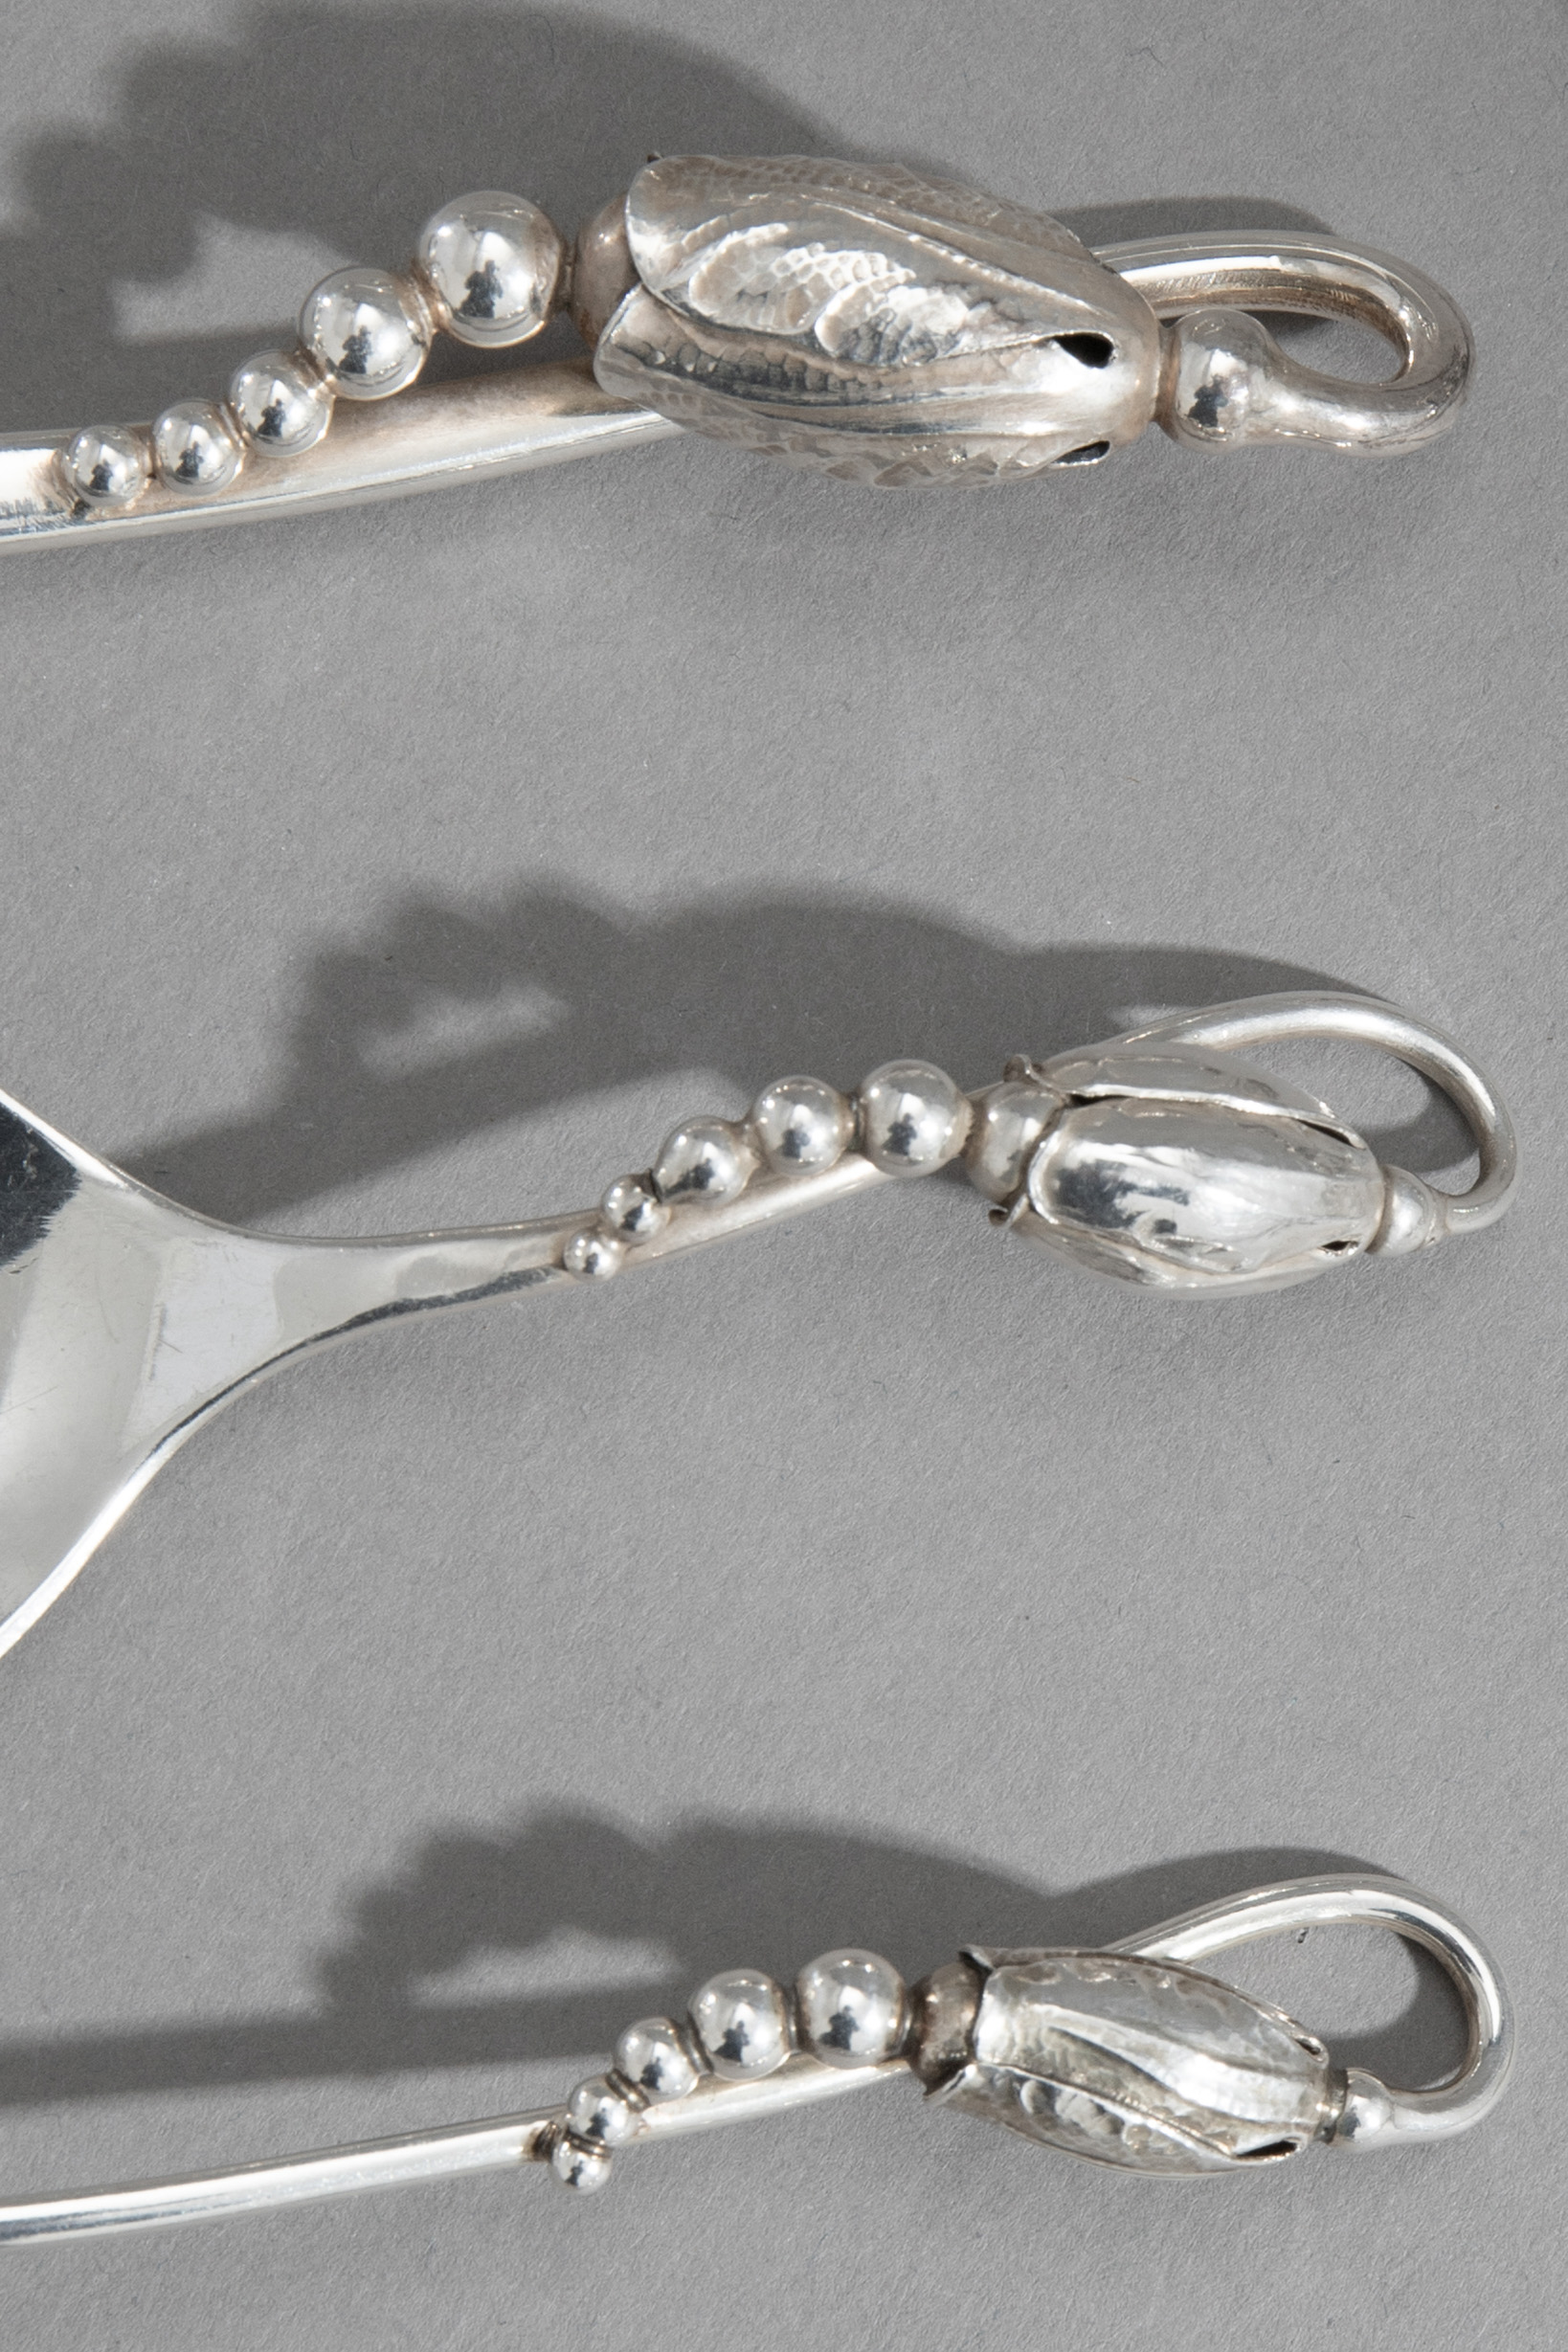 Set of silver Georg Jensen, 7 parts Magnolia/ Blossom and others - Image 3 of 5